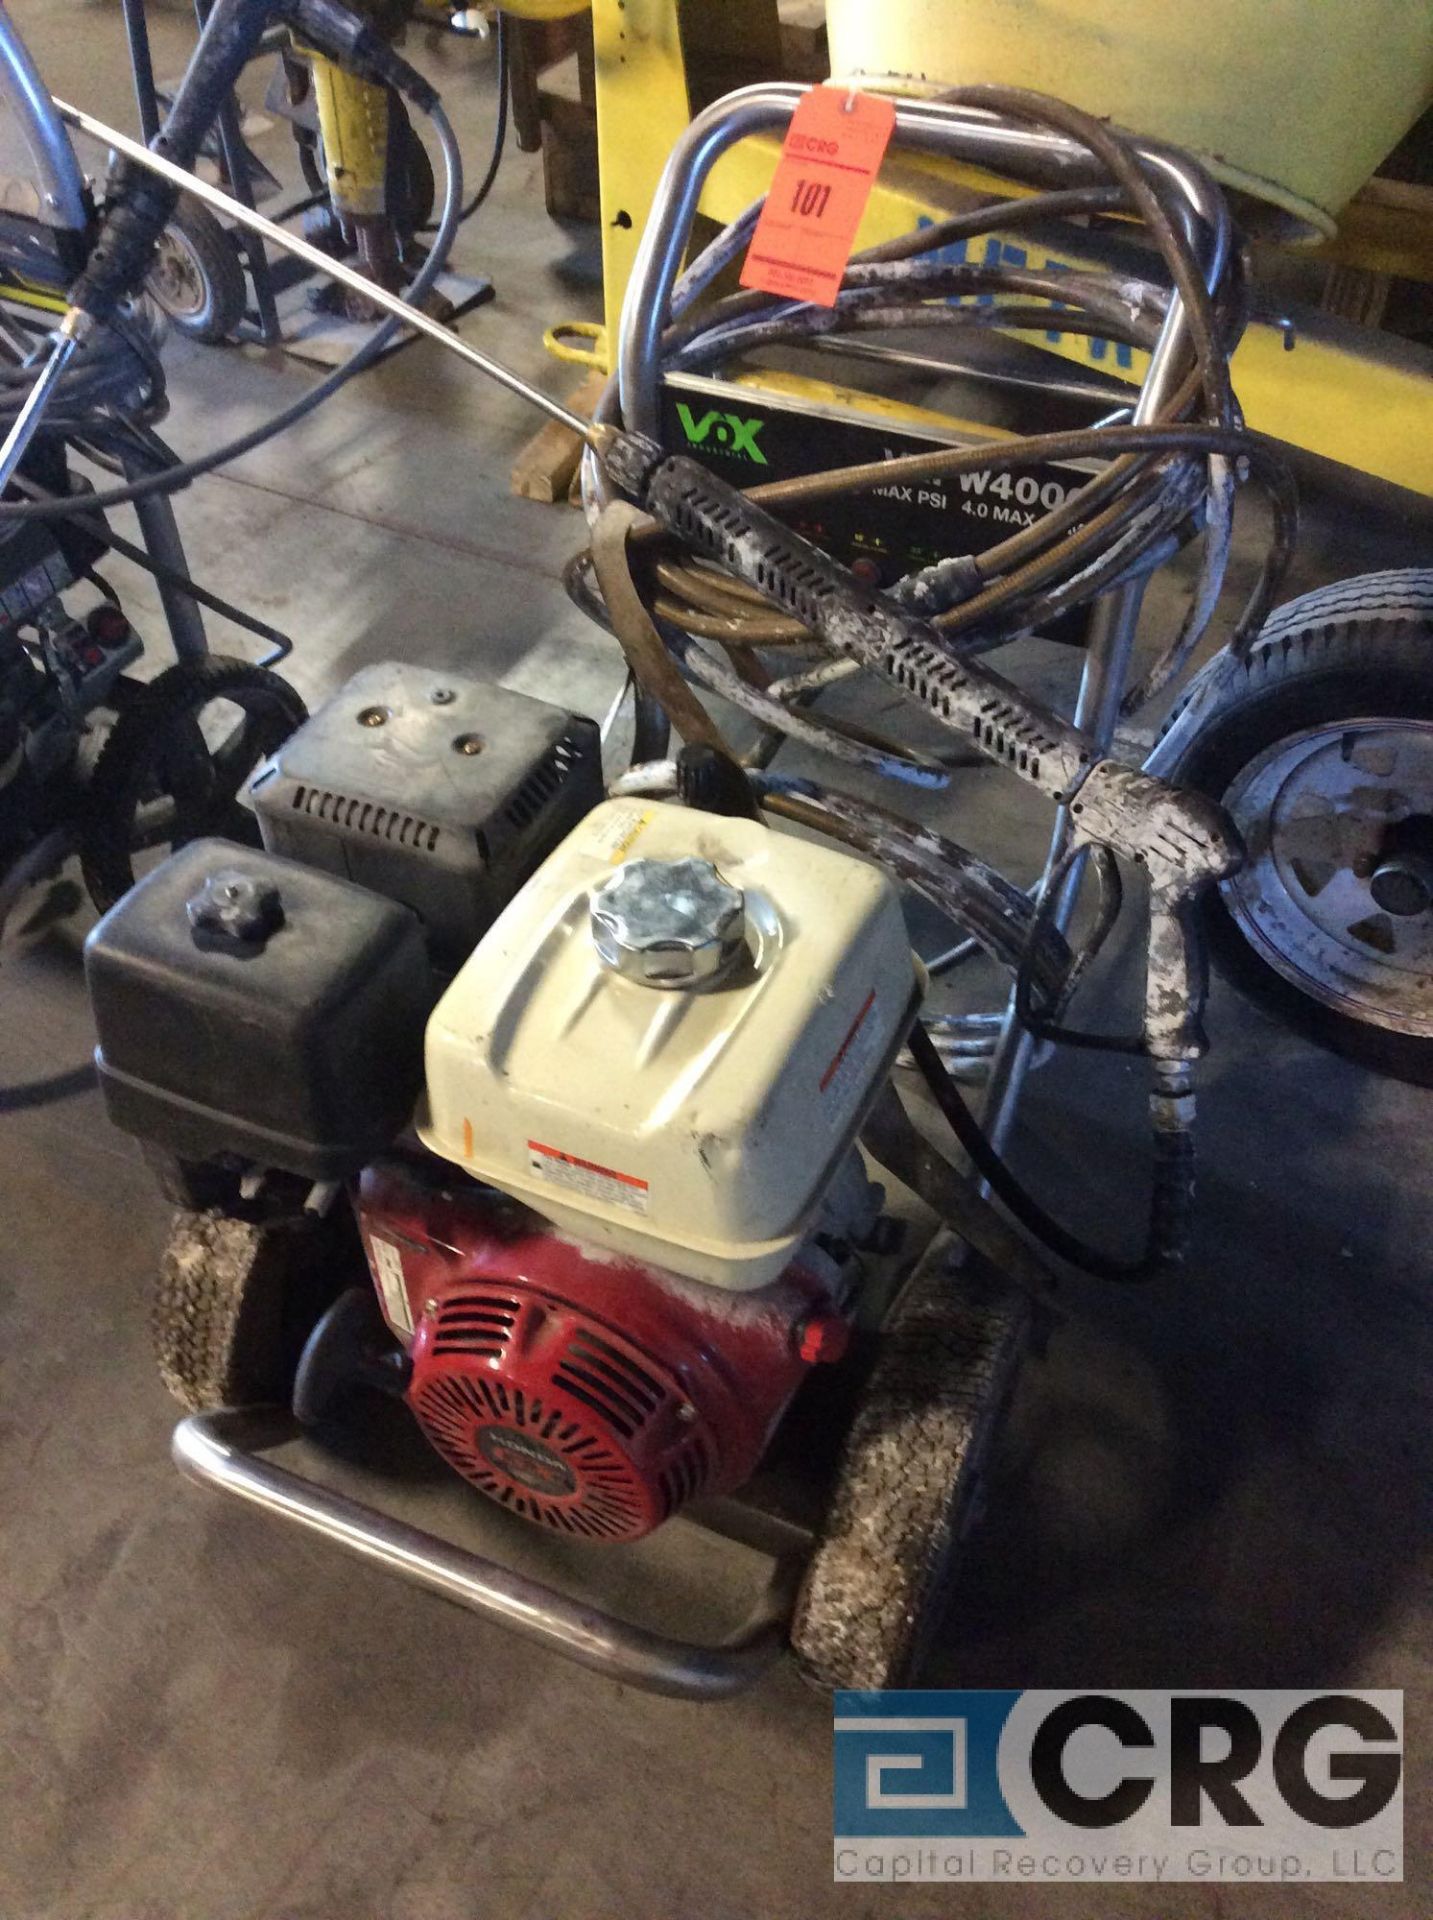 VOX industrial portable pressure washer, mn VXPW4000, 4000 max psi, with Honda GX390 gas engine (